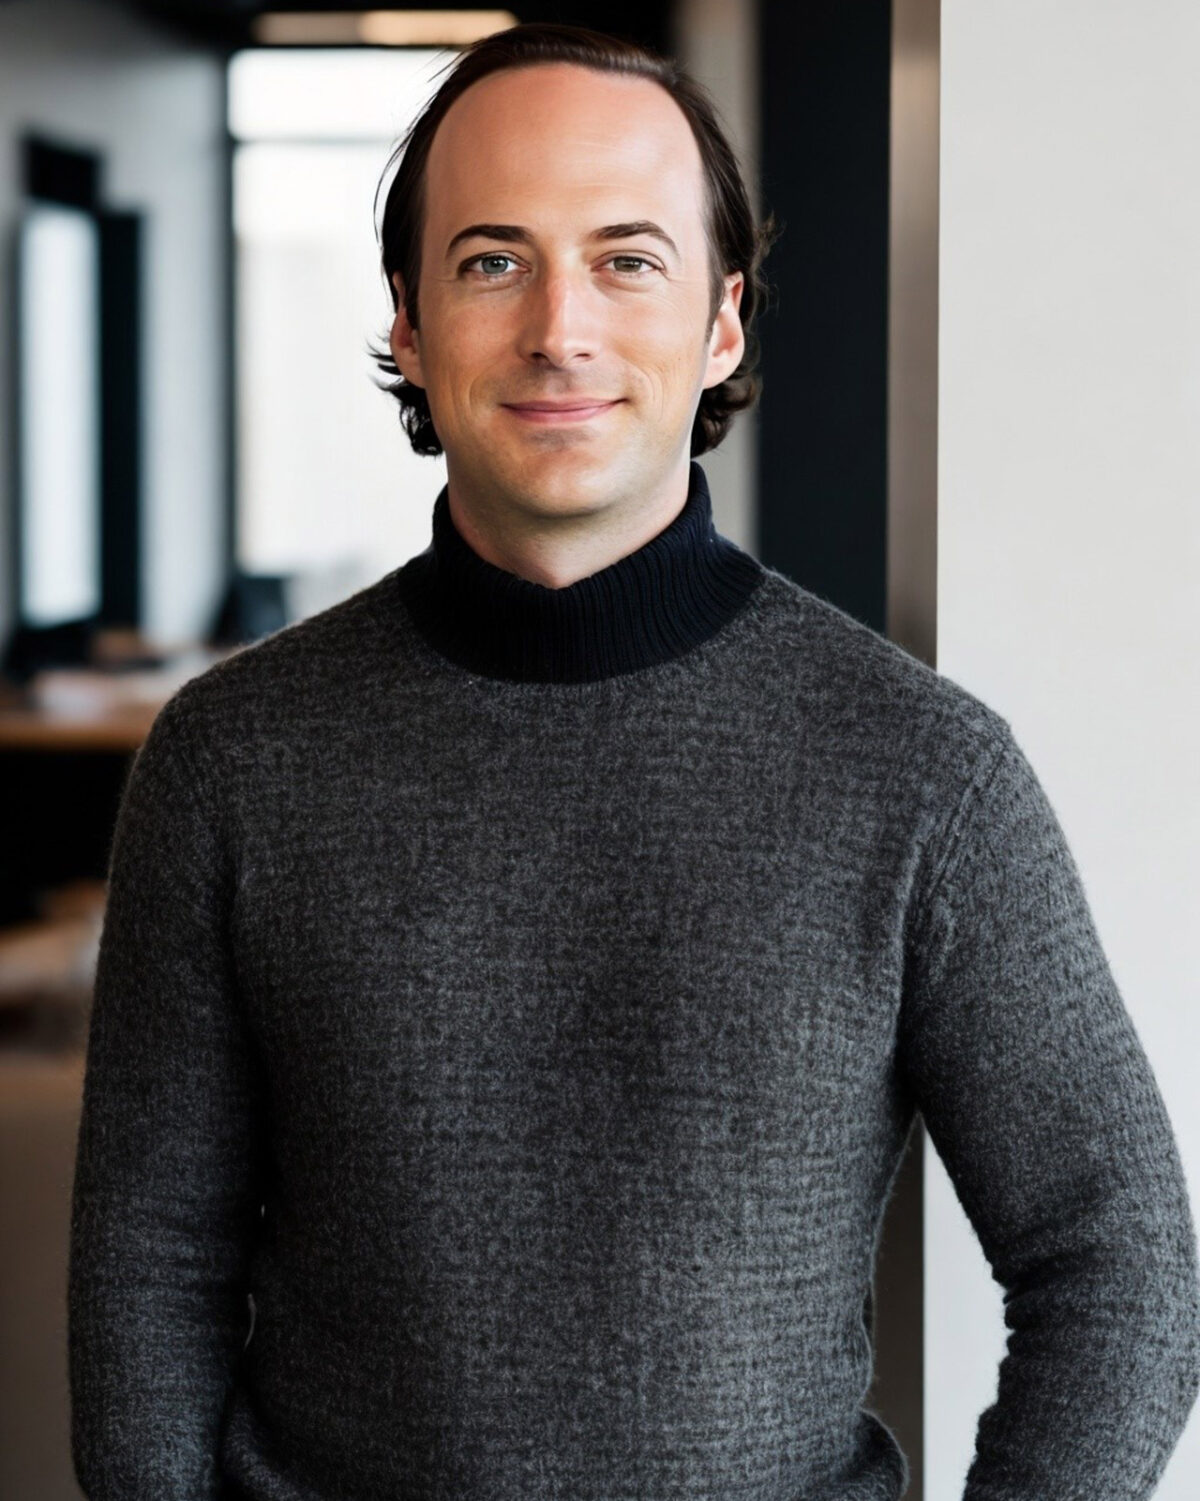 Brian Gordner smiles and wears a navy turtleneck sweater while standing in an office.